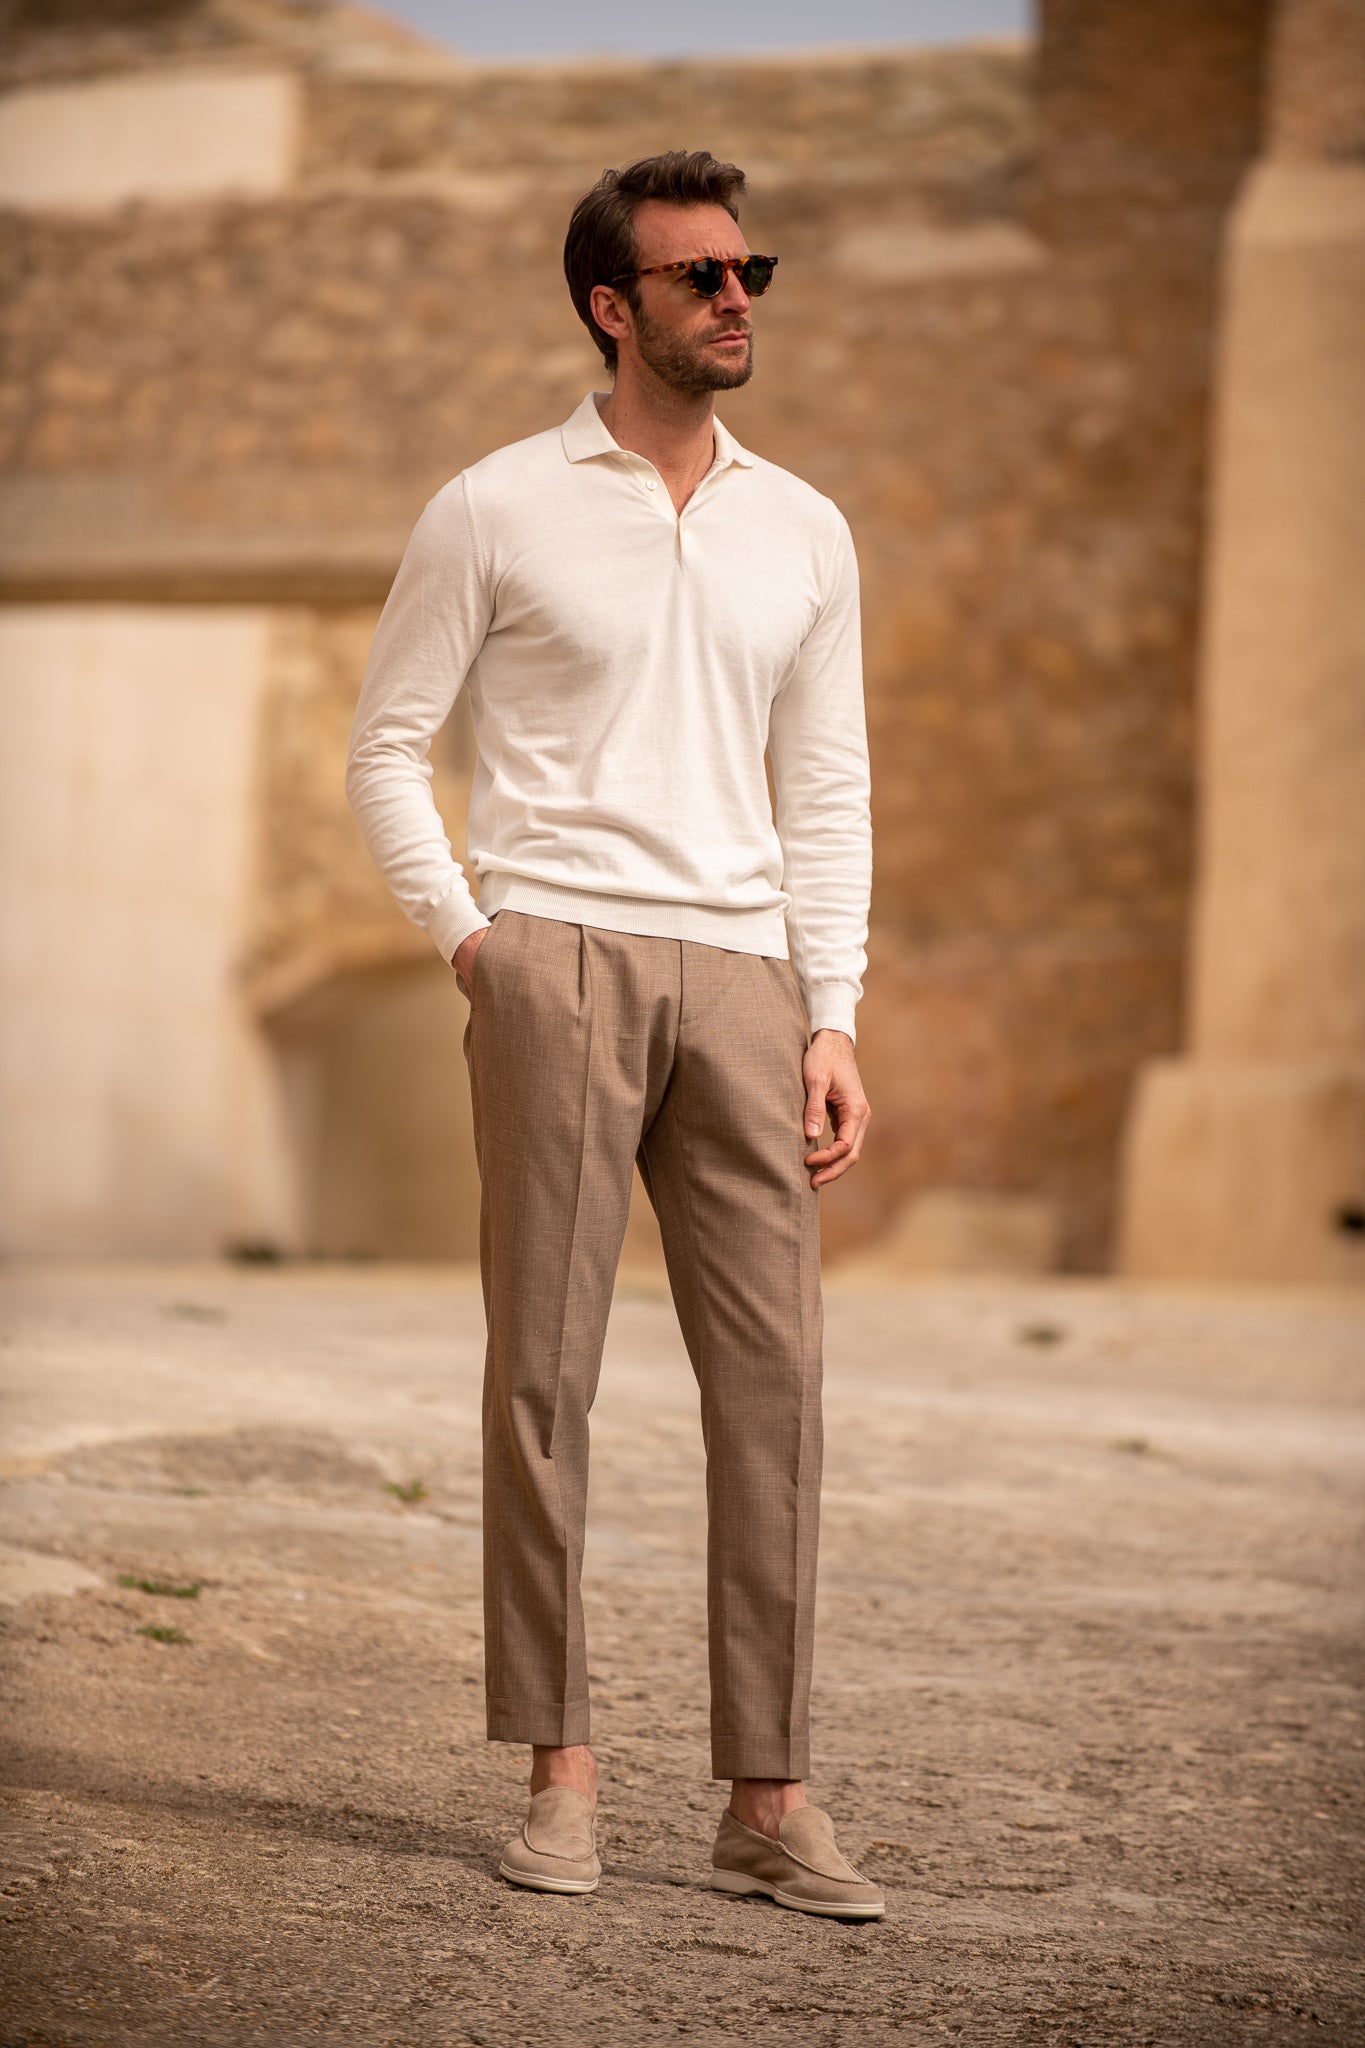  Men wool trousers, almond  trousers, summer wool trousers, men light brown trousers, high rise italian trousers, italian almond trousers, Pantalon en laine pour homme, pantalon en amande, pantalon en laine pour l'été, pantalon marron clair pour homme, pantalon italien à taille haute, pantalon italien en amande, Pantaloni uomo in lana, pantaloni a mandorla, pantaloni estivi in lana, pantaloni uomo marrone chiaro, pantaloni italiani a vita alta, pantaloni italiani a mandorla,